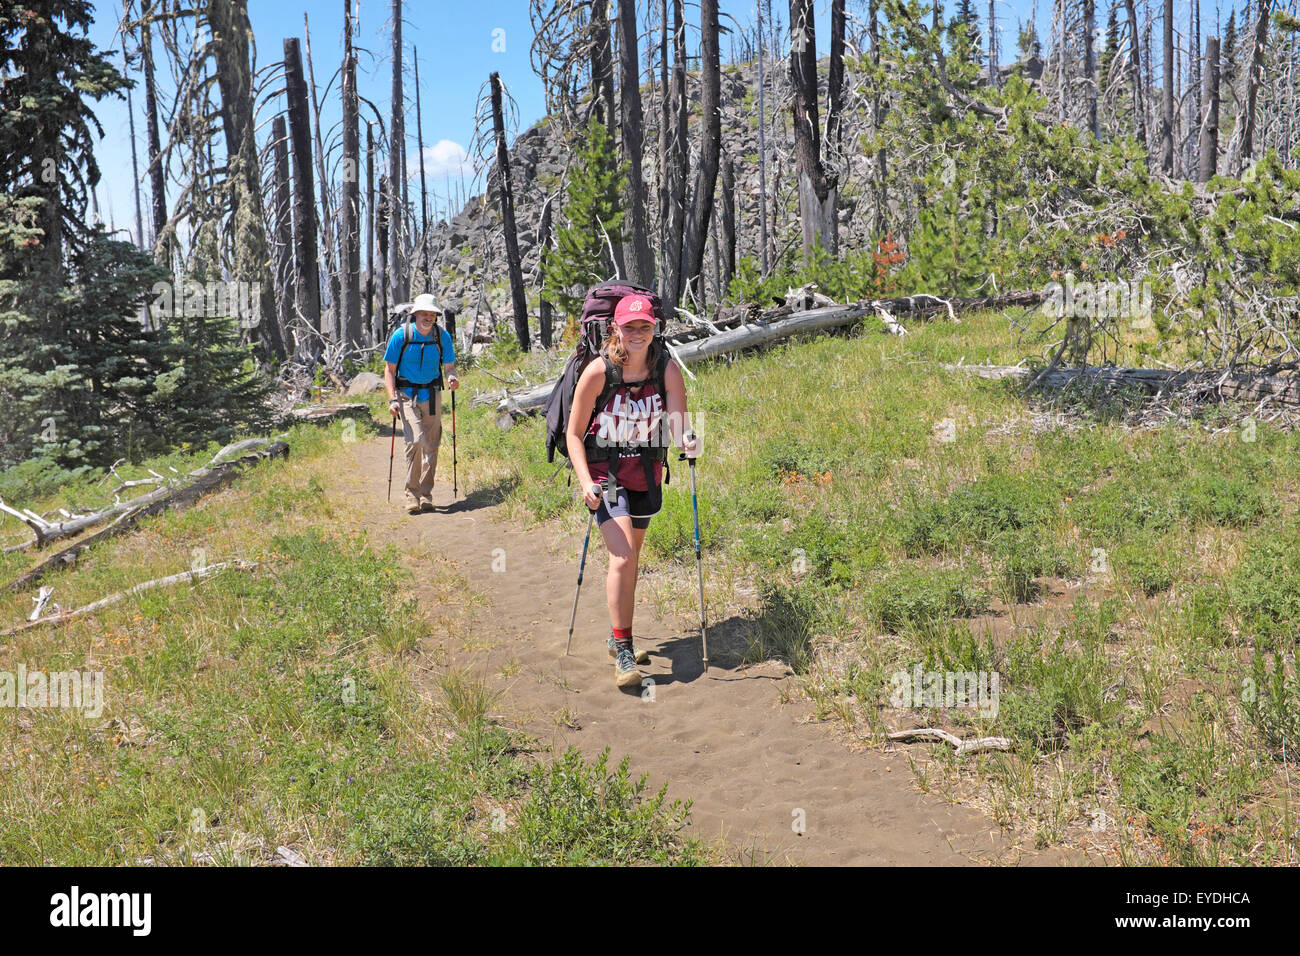 Backpackers on the Pacific Crest Trail near Santiam Pass, in the Oregon Cascades. Stock Photo